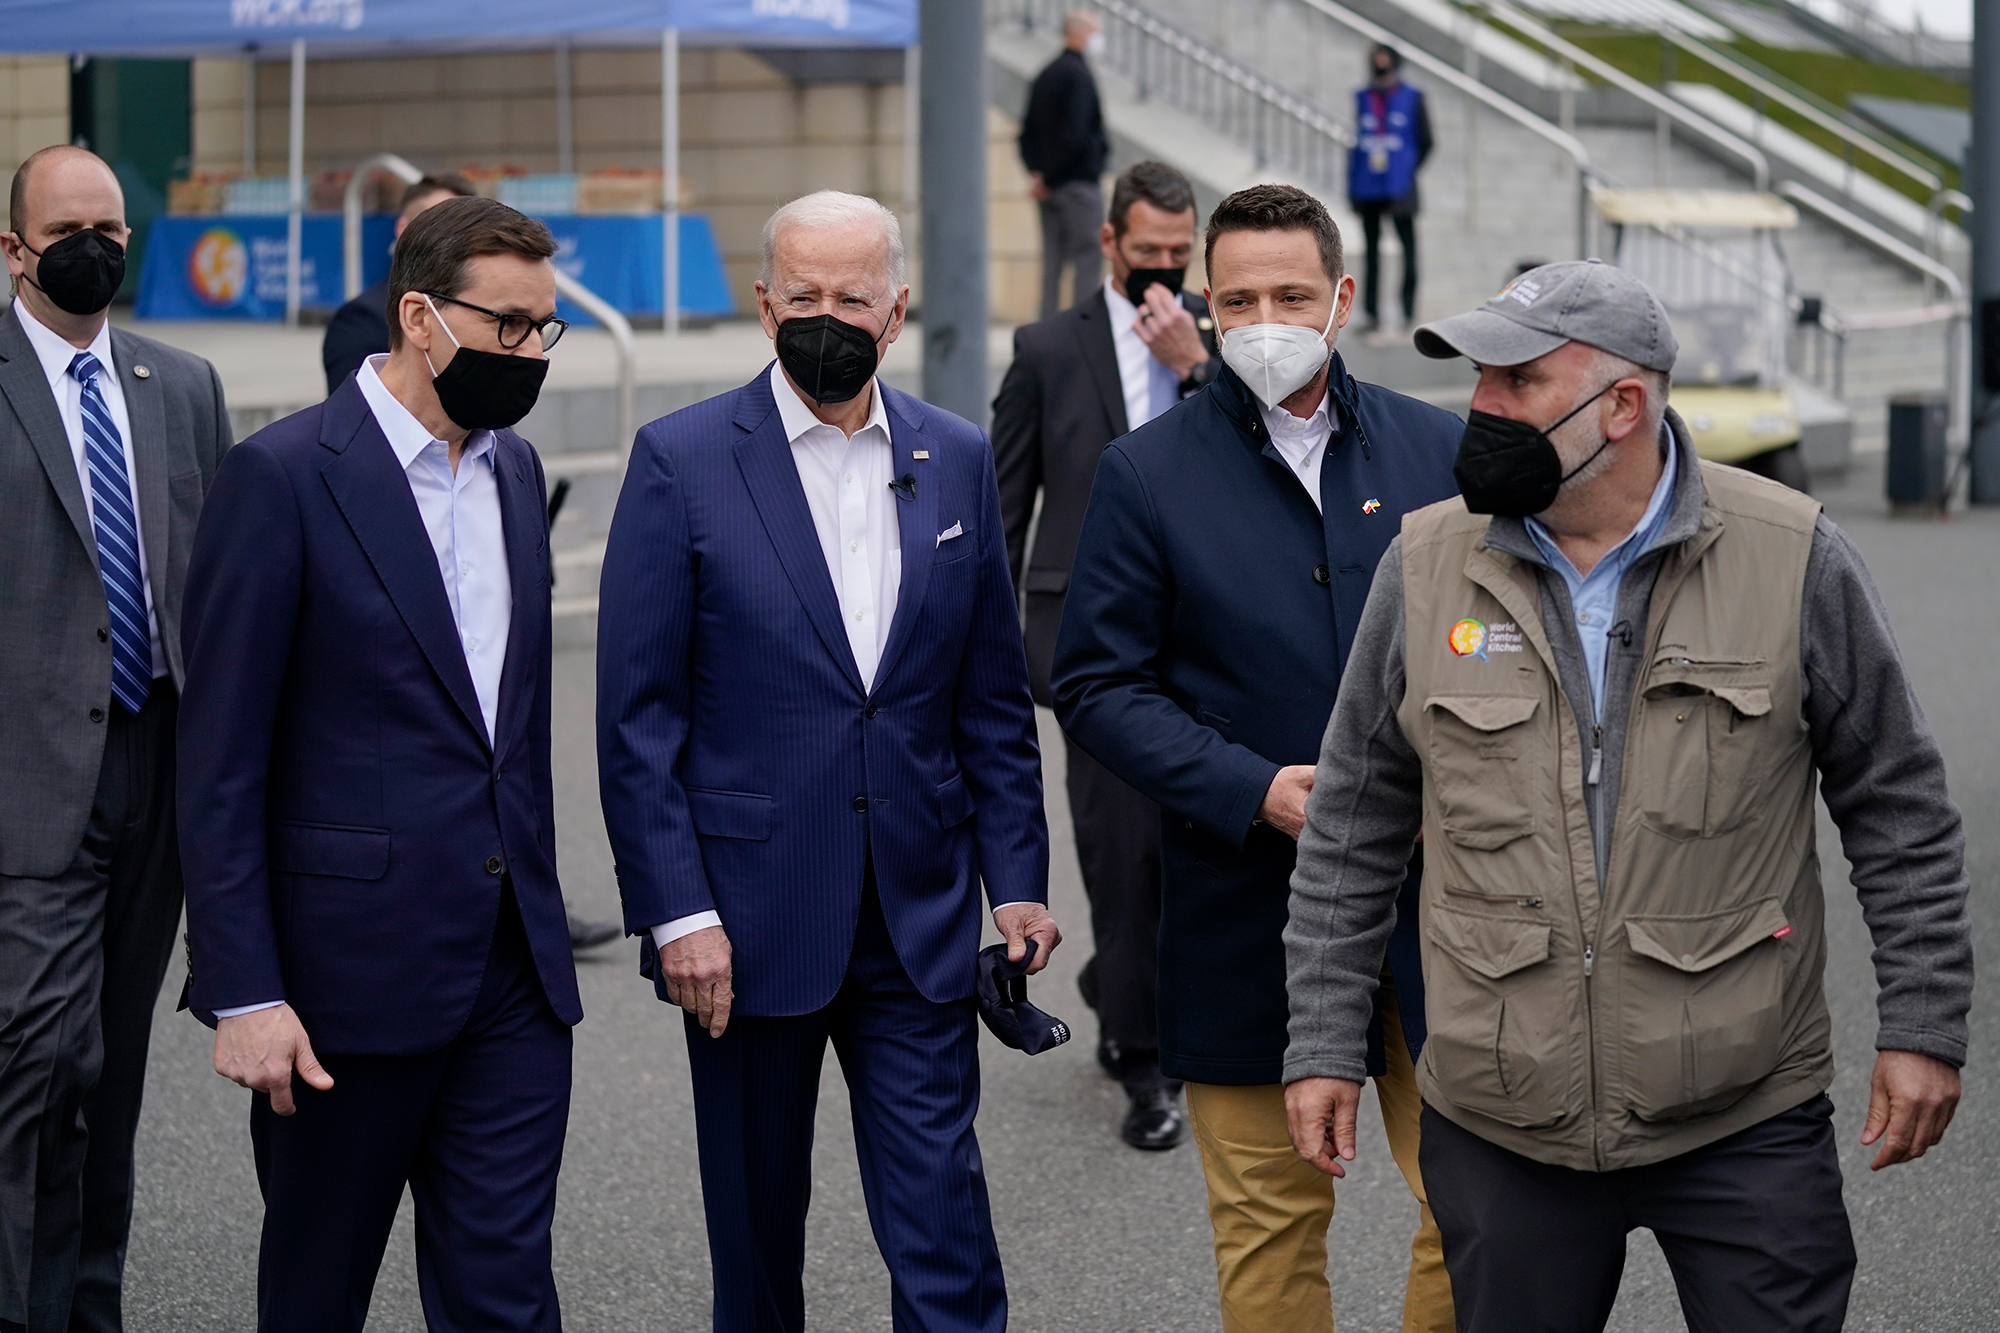 US President Joe Biden meets with chef José Andrés, far right, at a World Center Kitchen food distribution site in Warsaw, Poland on March 26.